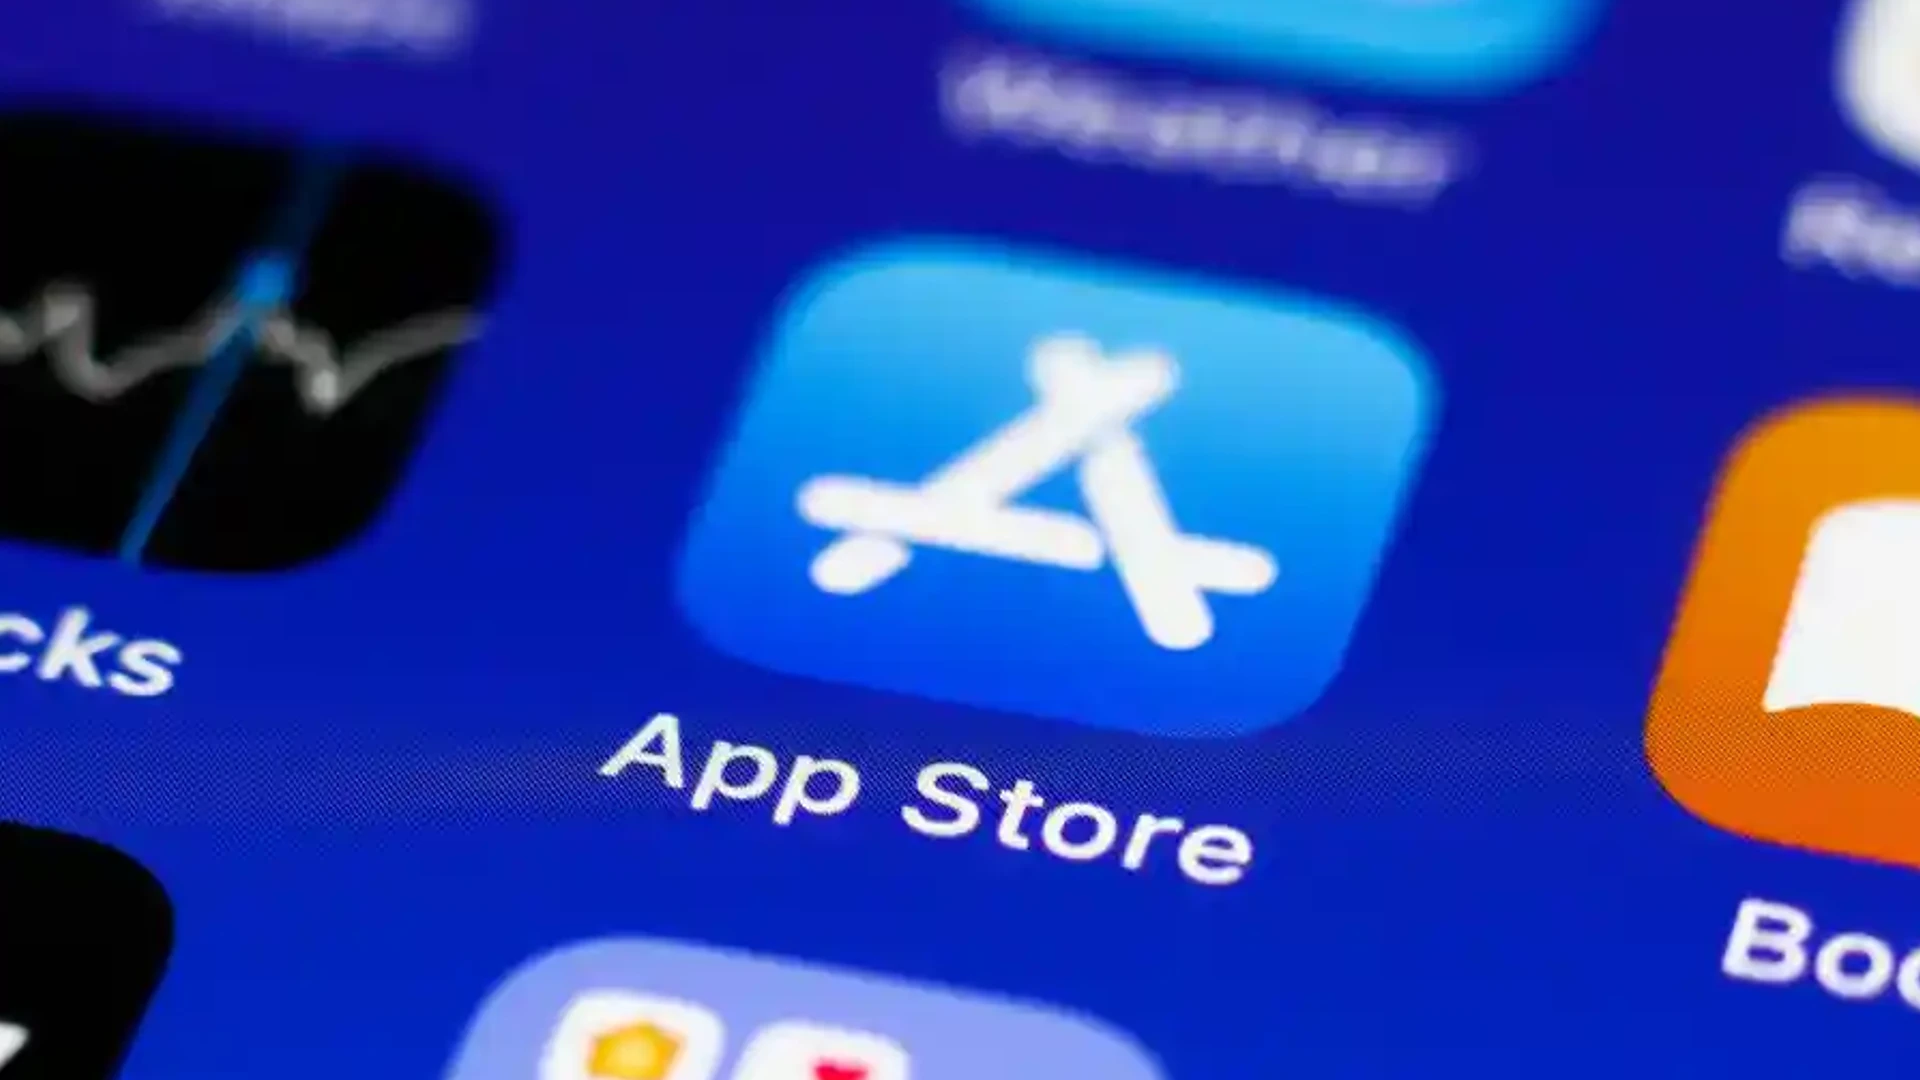 Developers Will Now Be Able To Unlist Apps From The App Store